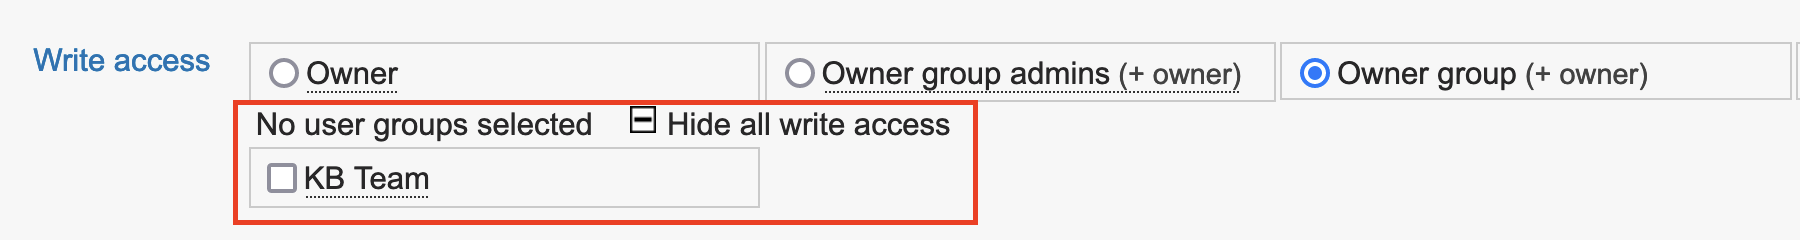 When "Show all write access" is expanded, any existing user access groups or doc-specific authorization groups will appear. The group names will be used to label the checkboxes.